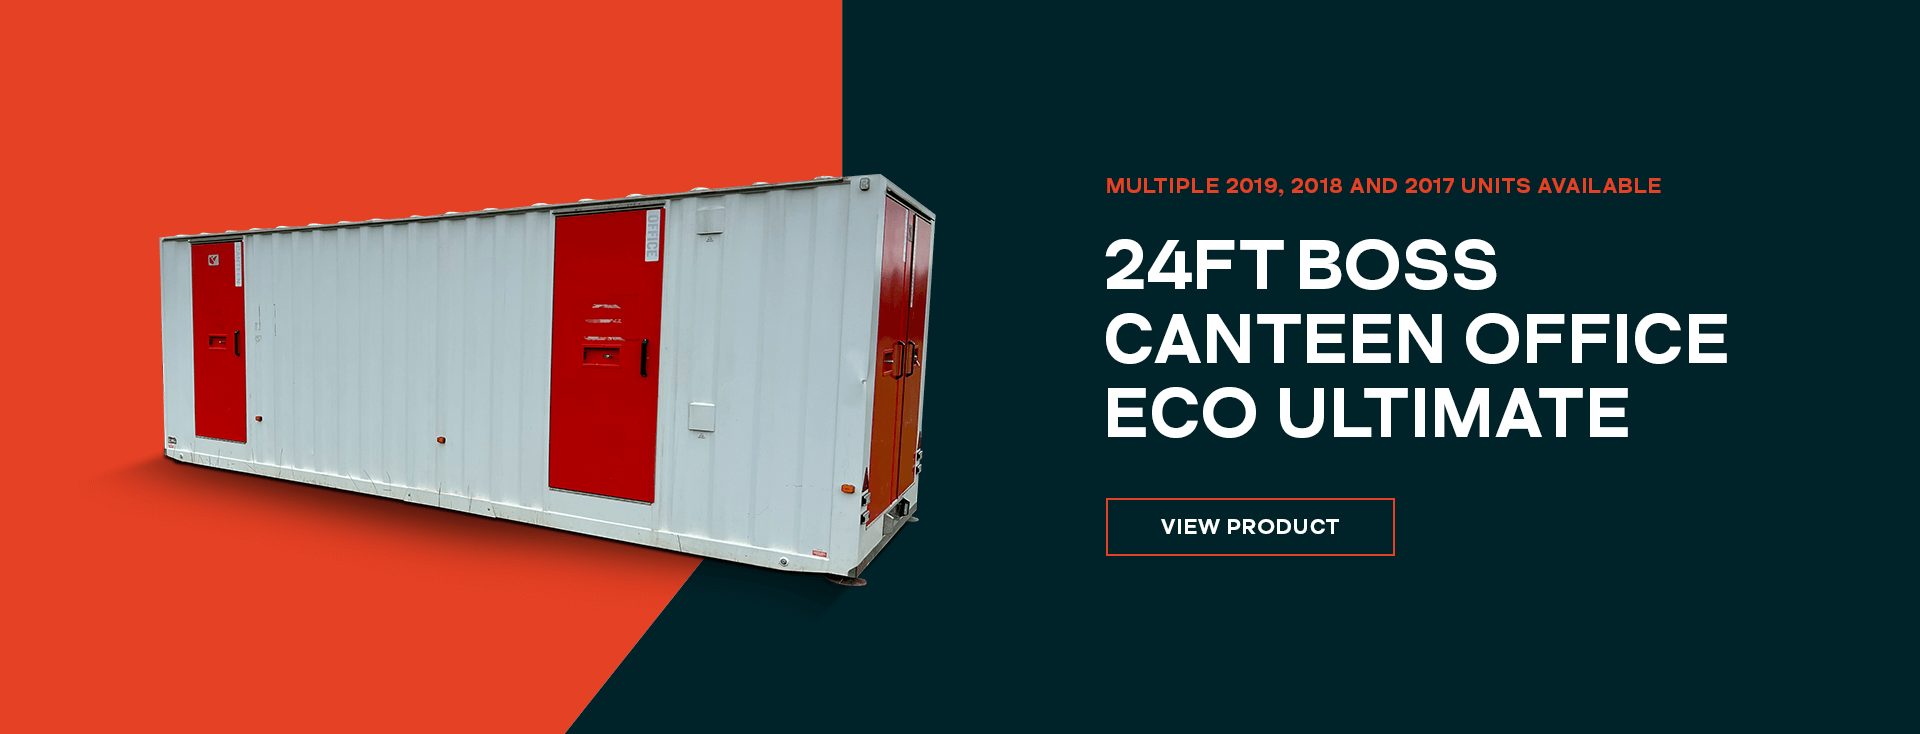 24FT BOSS CANTEEN OFFICE ECO ULTIMATE